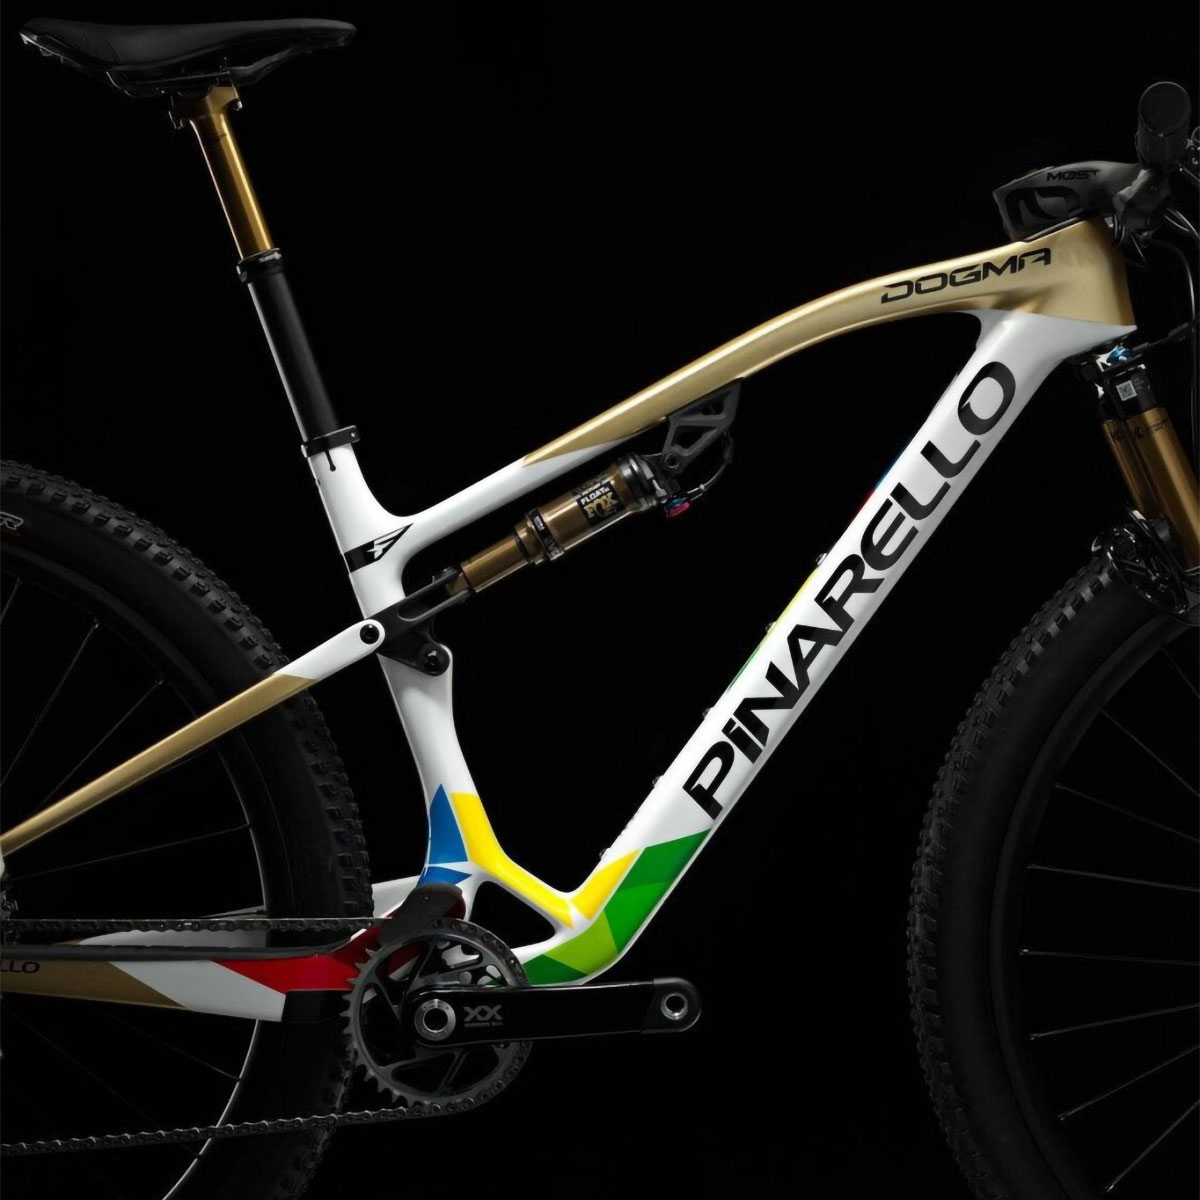 Pinarello Dogma XC: Details, Configurations, and Prices of Tom Pidcock and Pauline Ferrand-Prévot's Racing Bike